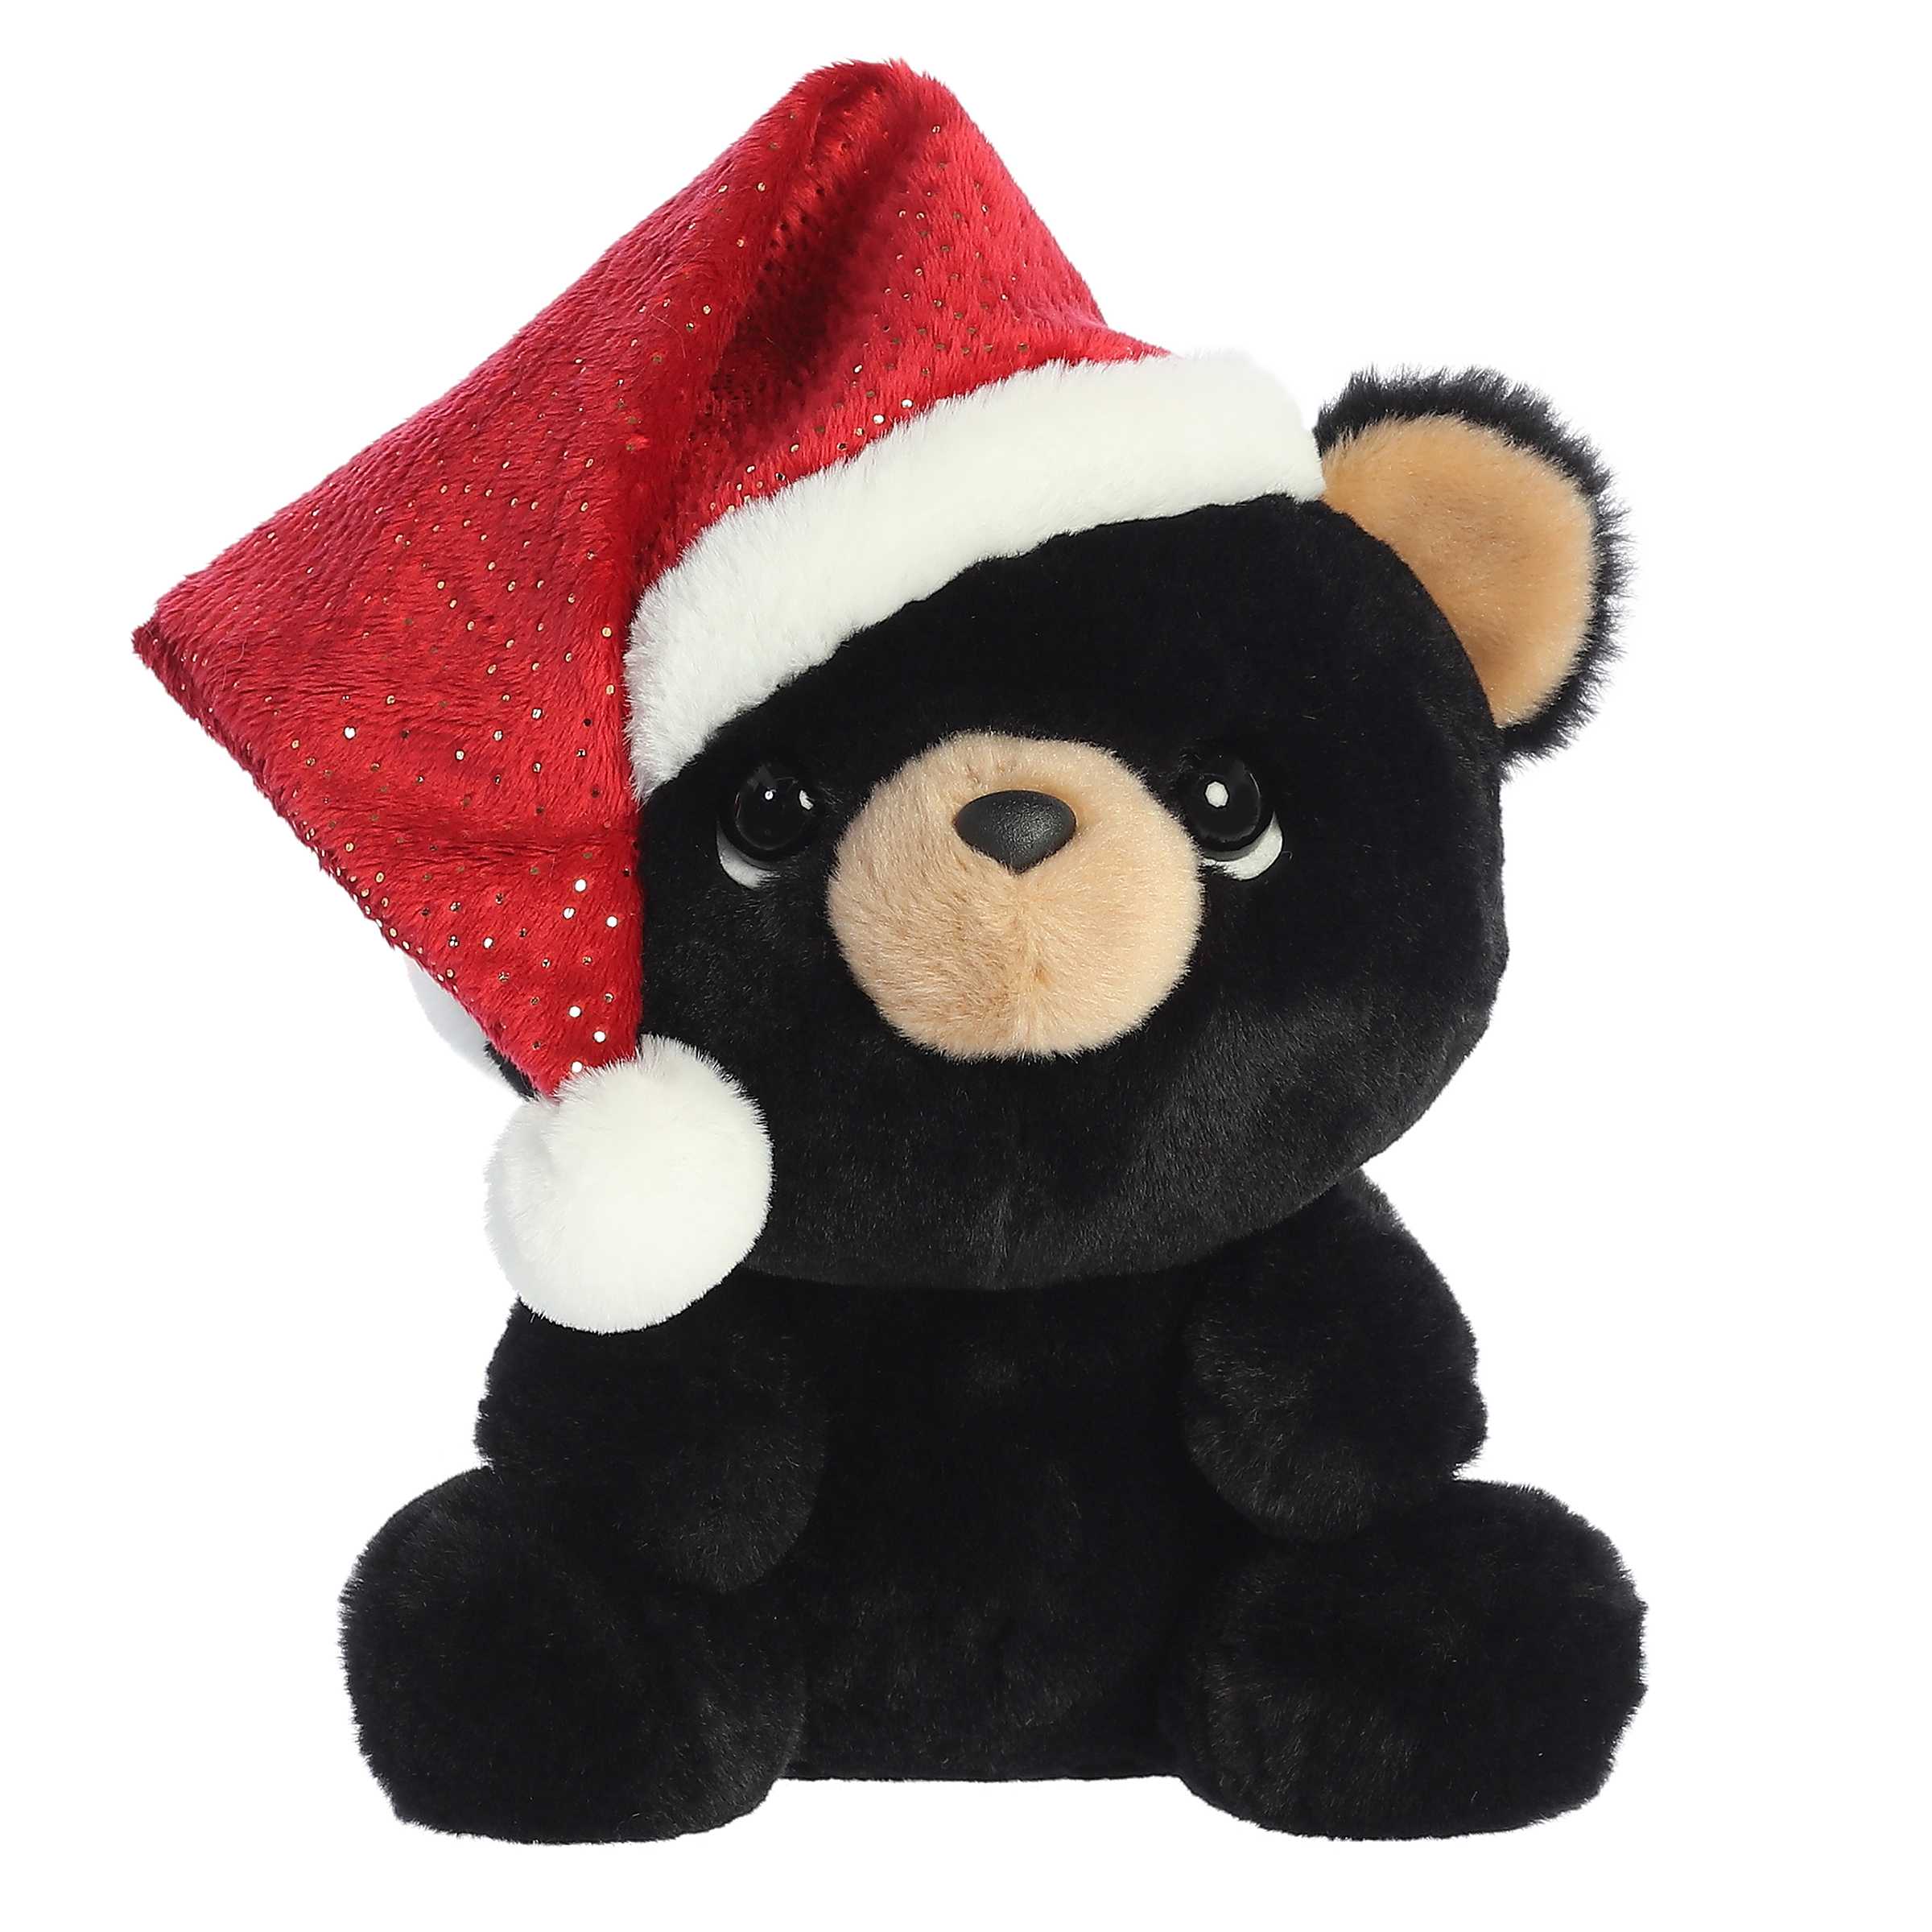 Black teddy bear looking up with endering eyes wearing a giant Santa hat that slides off one side of its cute big head